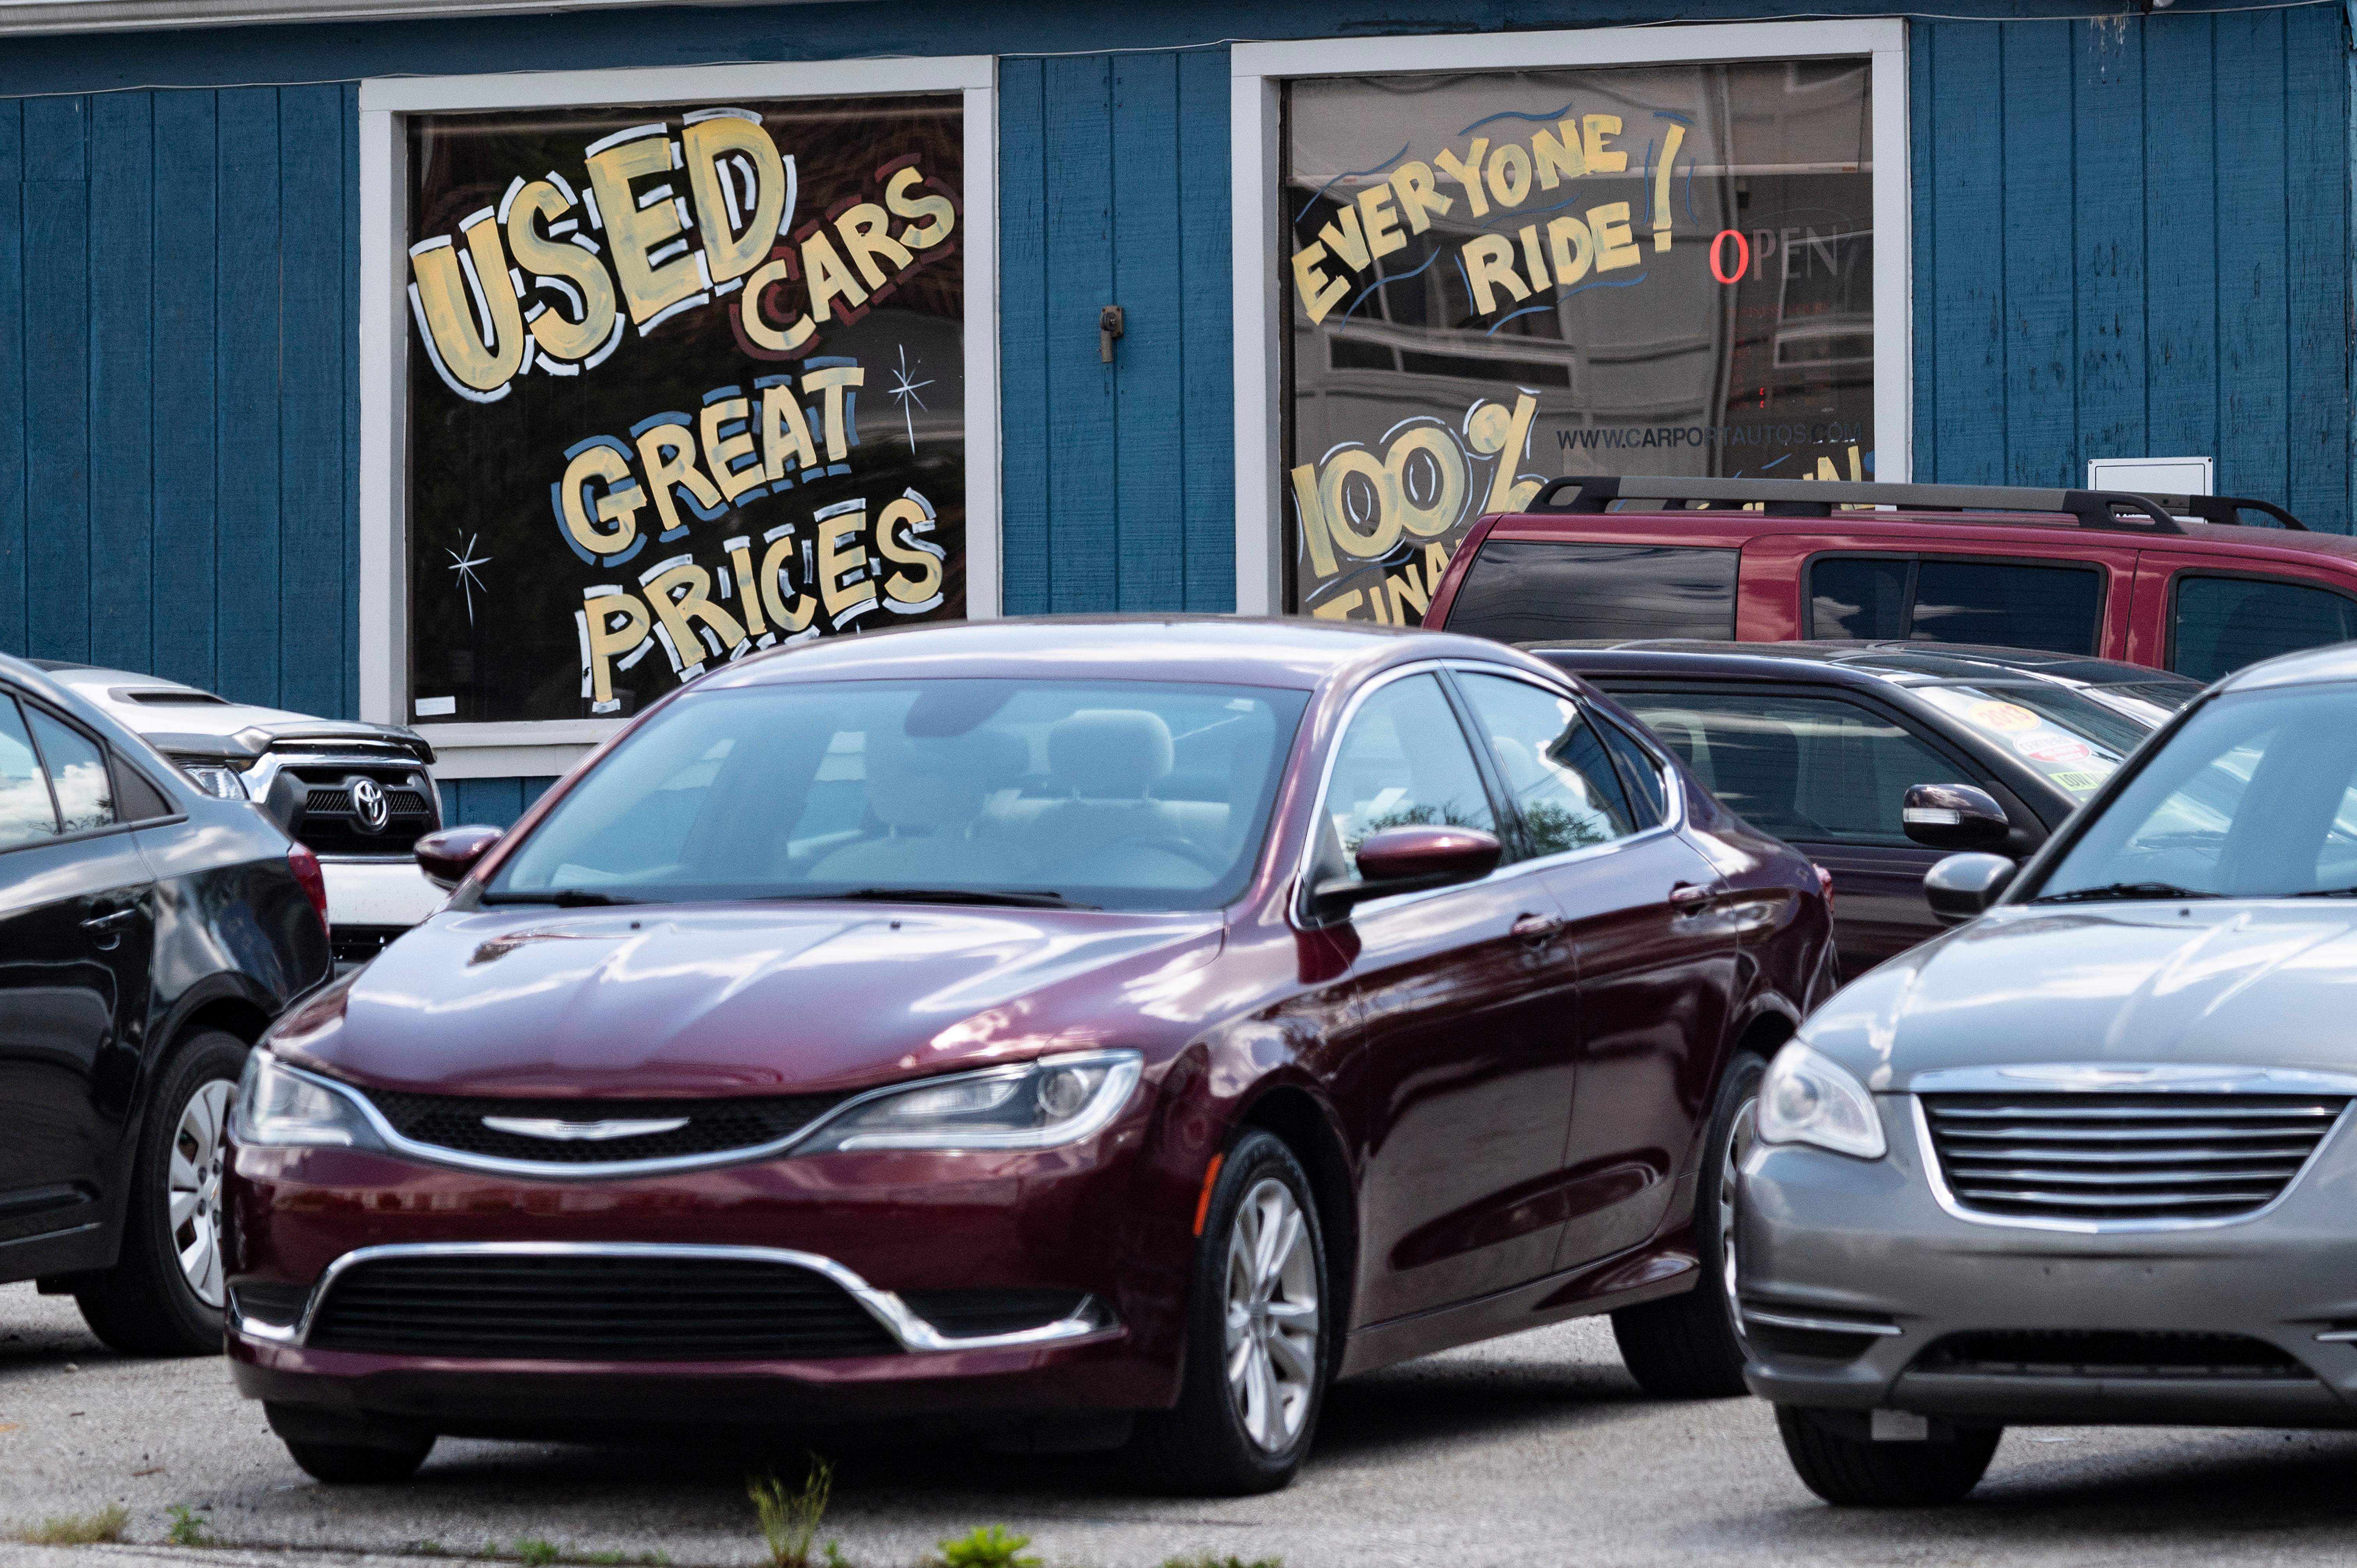 Used car prices have surged. How to make that work to your advantage